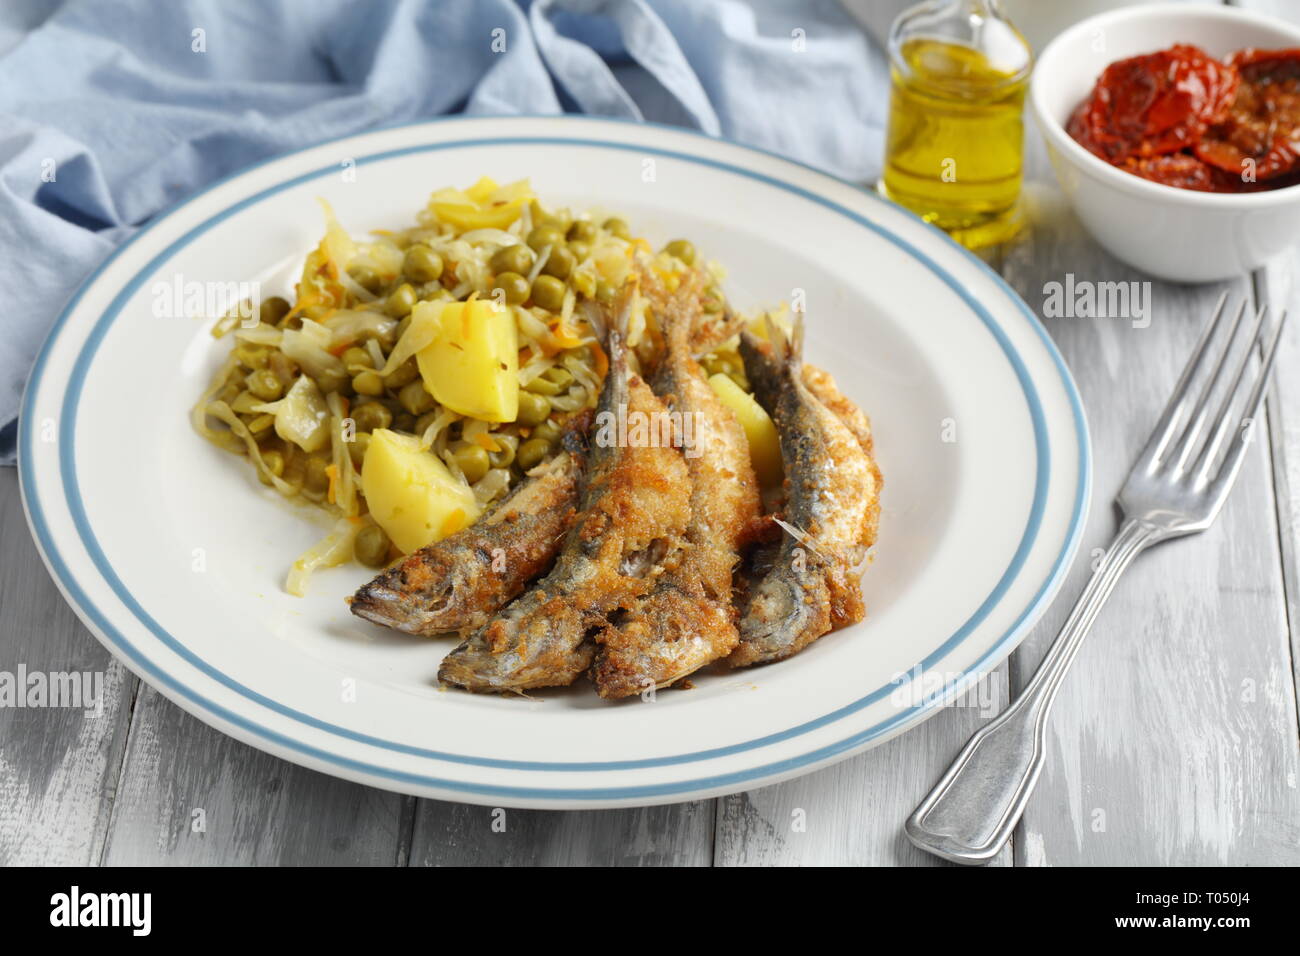 Chicharros fritos, traditional Portugal roasted breaded horse mackerel fishes with cabbage, potato, and green pea stew Stock Photo